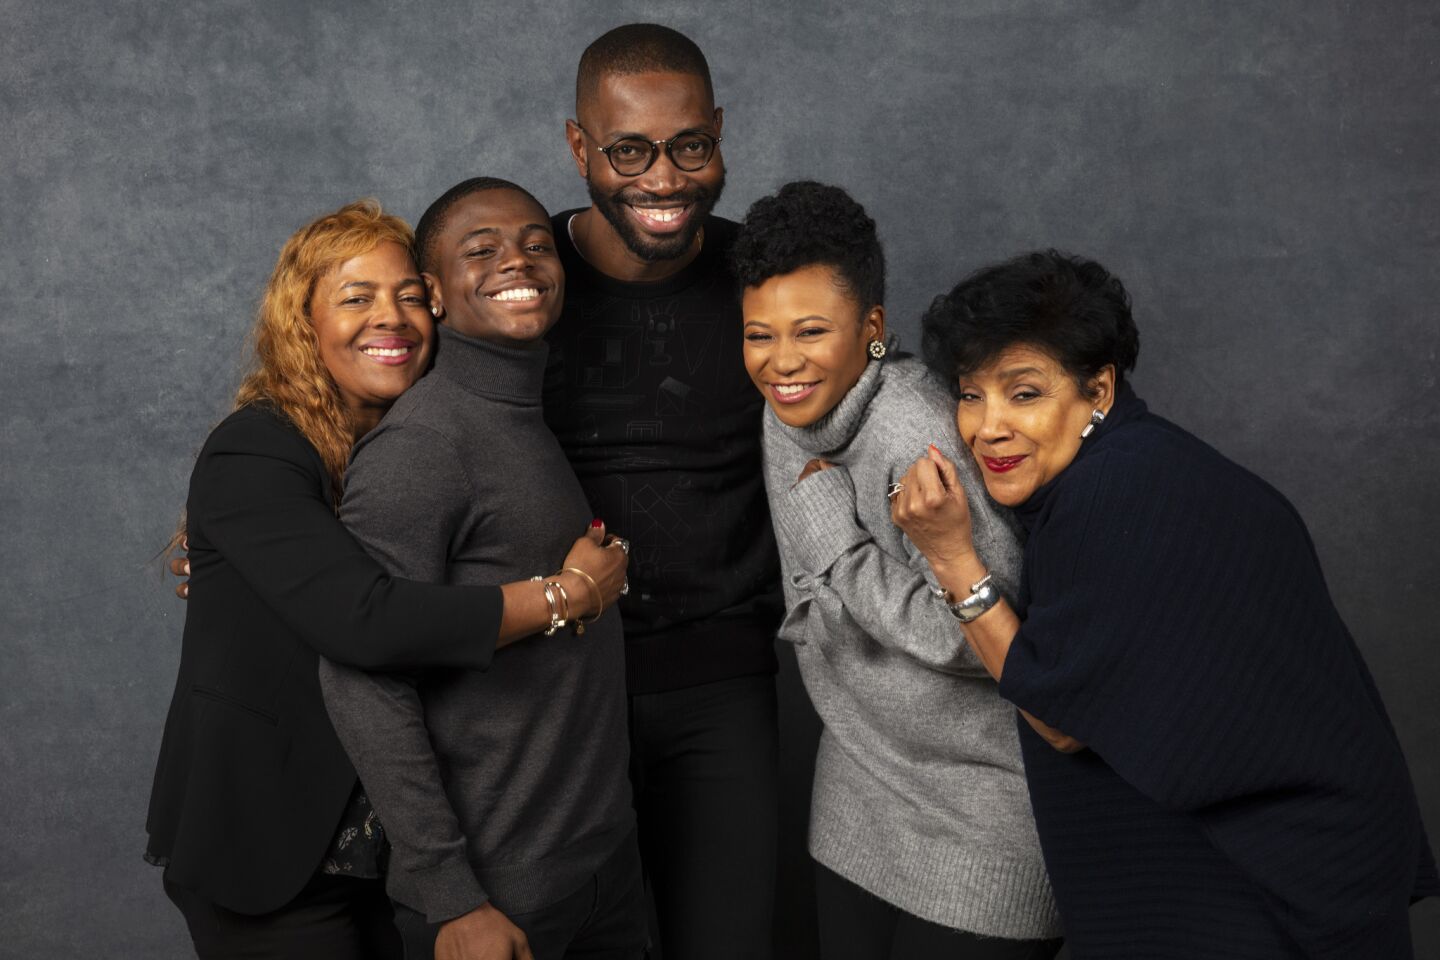 Executive producer Denitria Harris-Lawrence, actor Akili McDowell, series creator Tarell Alvin McCraney, actor Alana Arenas and actor Phylicia Rashad from the television series "David Makes Man."